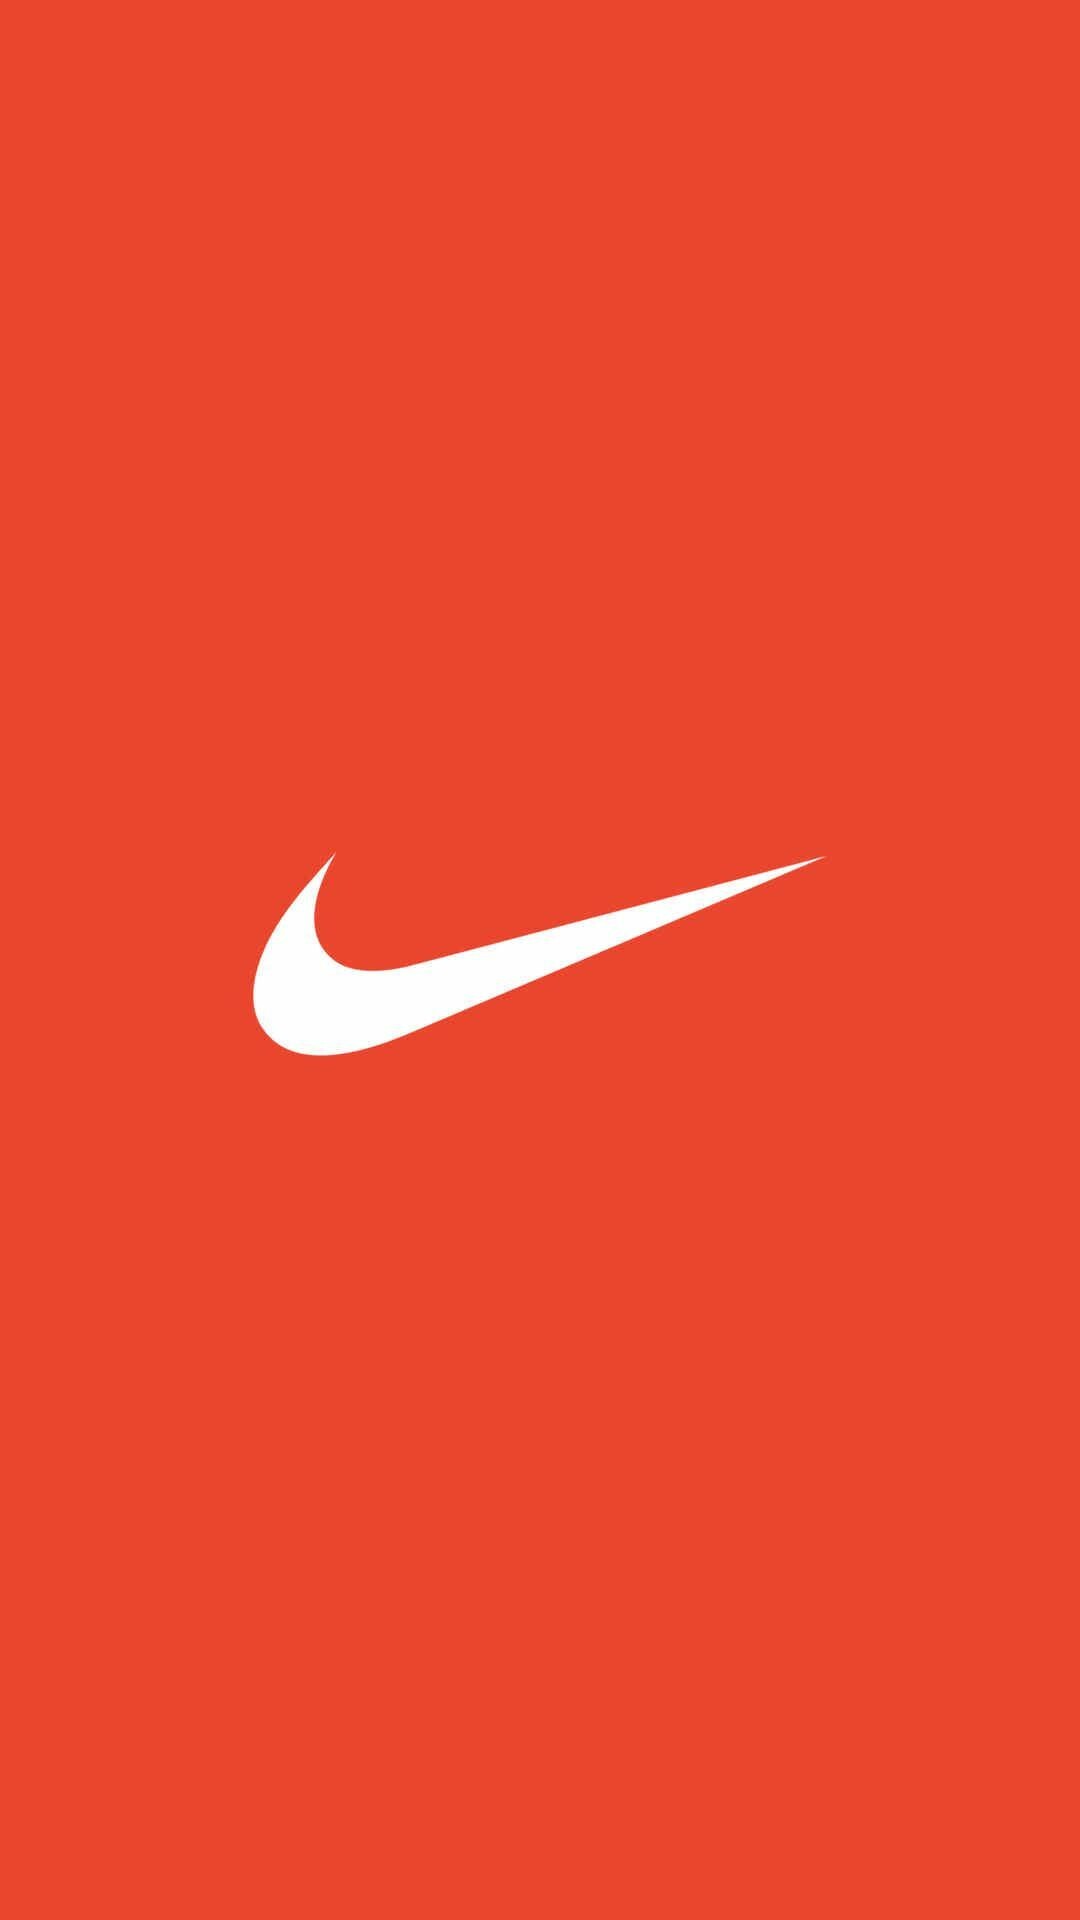 Nike: Sports brand, Ranked 89th in the 2018 Fortune 500 list of the largest United States corporations. 1080x1920 Full HD Wallpaper.